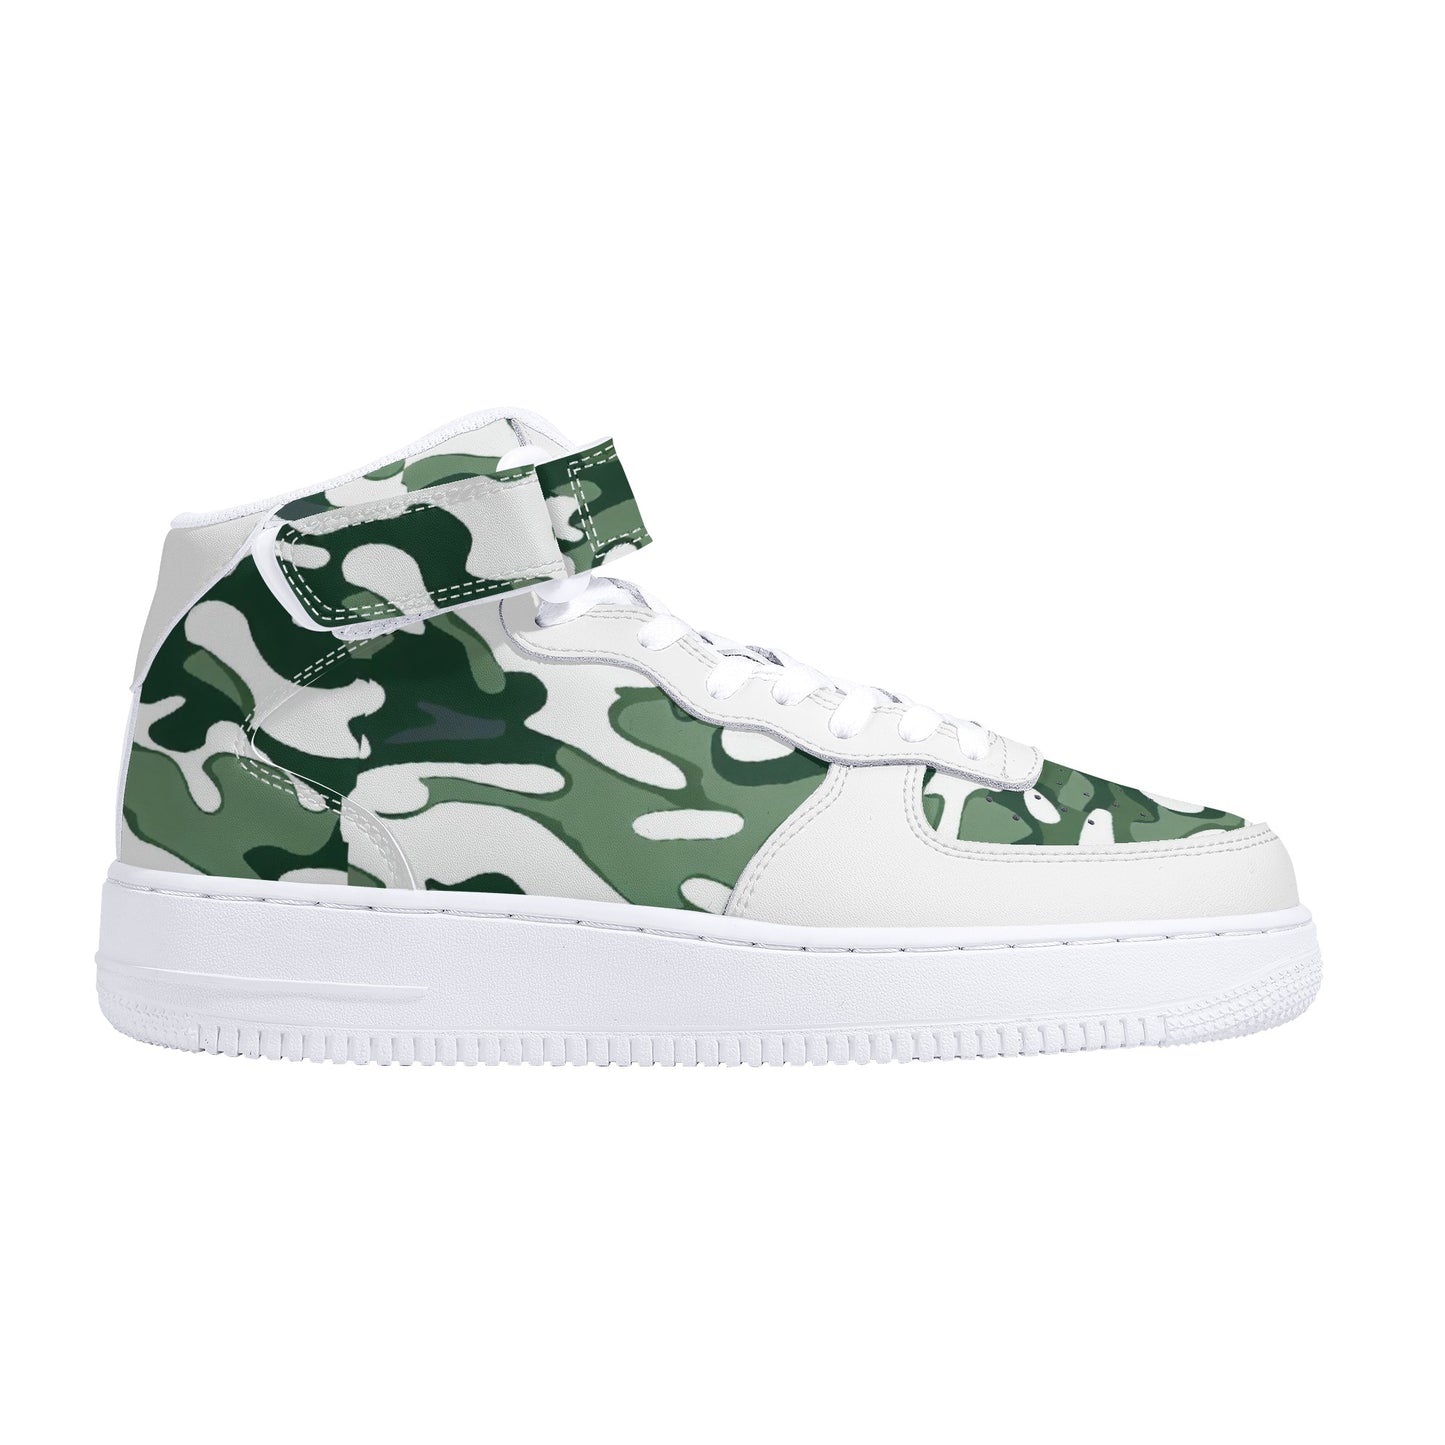 The B.E. Style Brand High Top Team Sneakers_Green for Him